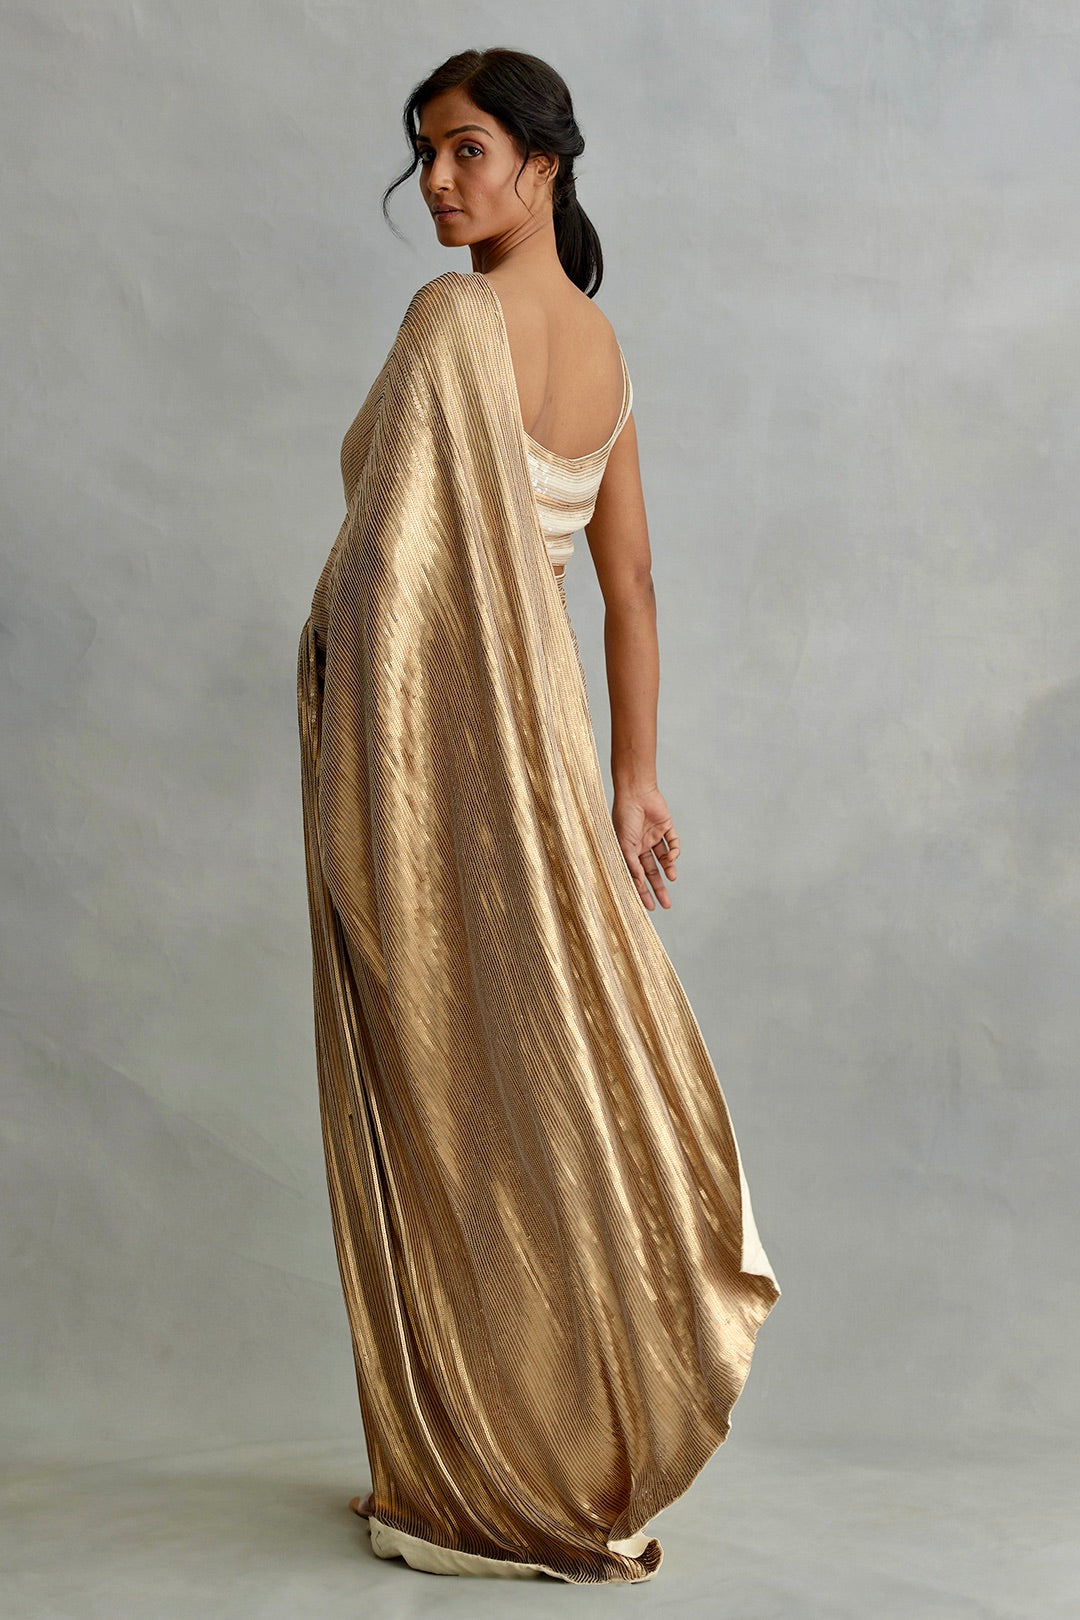 Sari in gold sequin sheeting embroidery